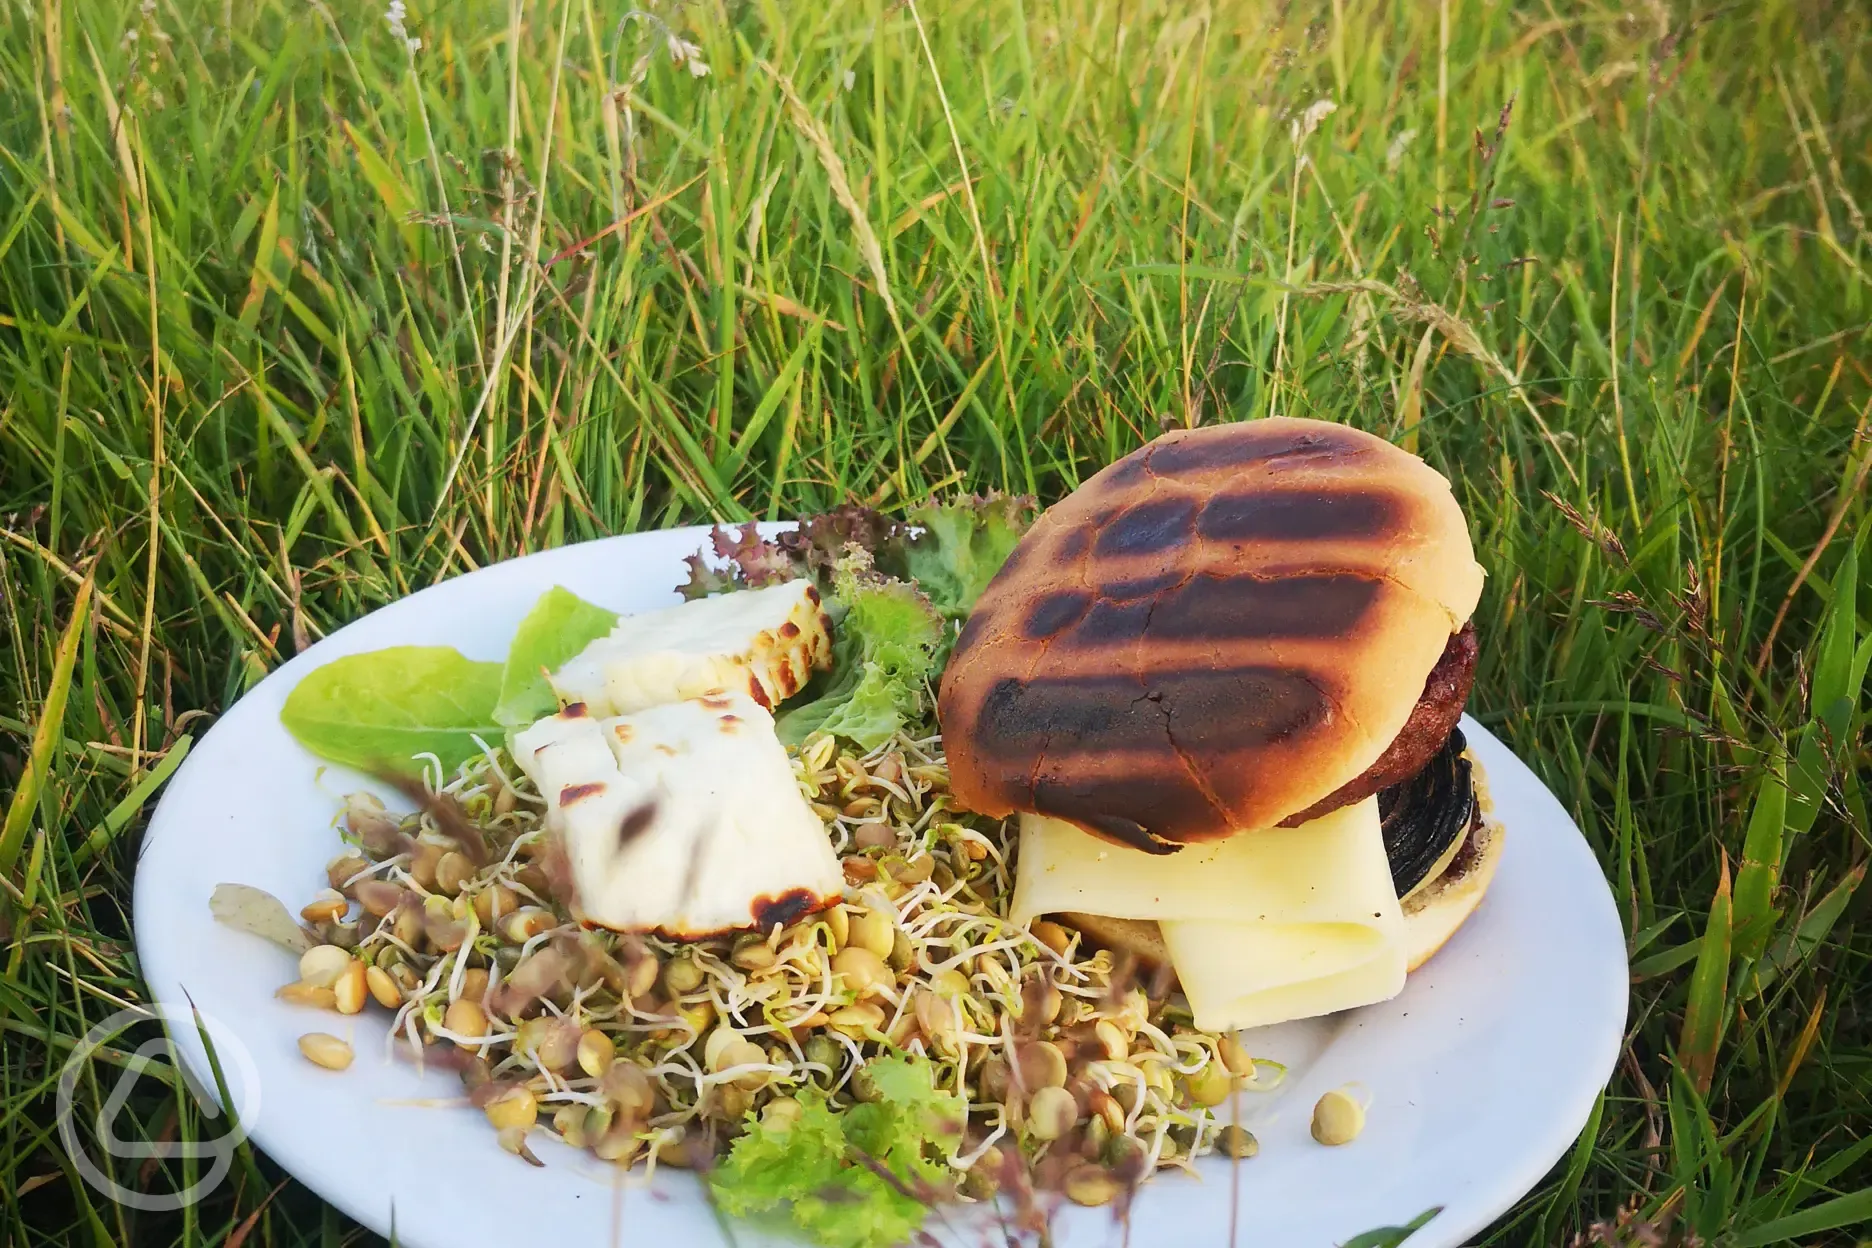 Bbq night! Cheeseburgers, grilled halloumi, sprouted lentils